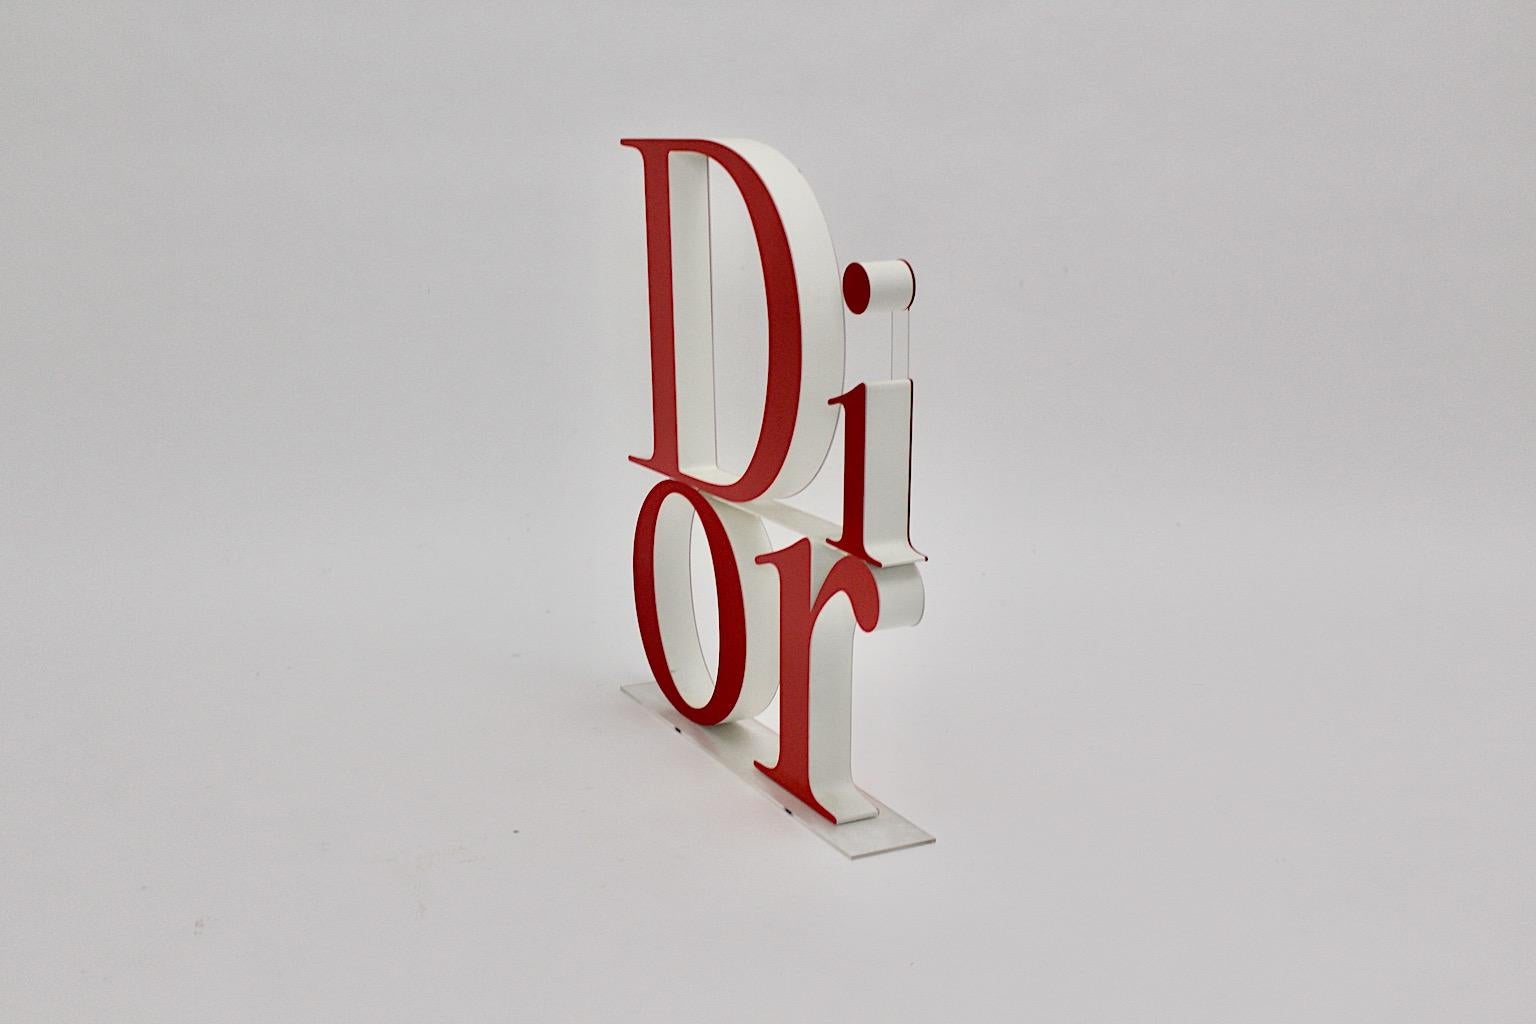 Christian Dior pink red large vintage logo advertising sign, which shows the Dior logo in large bold red pink red acrylic letters. 
The letters are fixed on a Lucite base.
Very good condition with minor signs of age and use.
Approx. measures:
Length